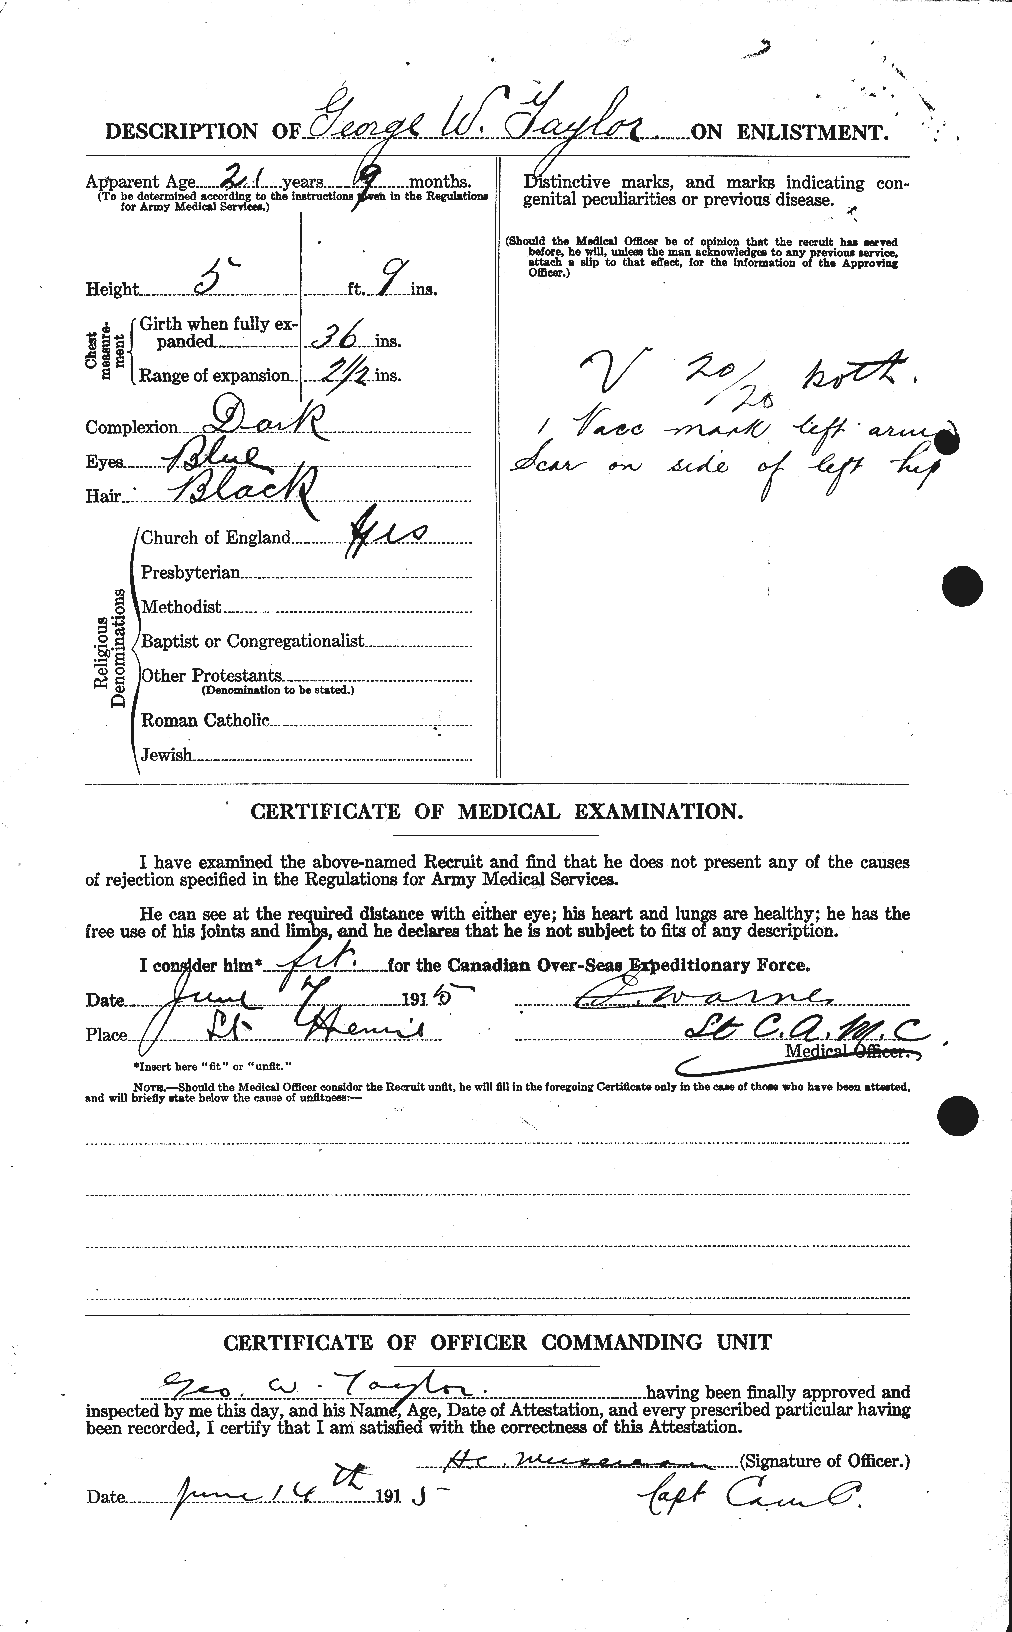 Personnel Records of the First World War - CEF 626359b